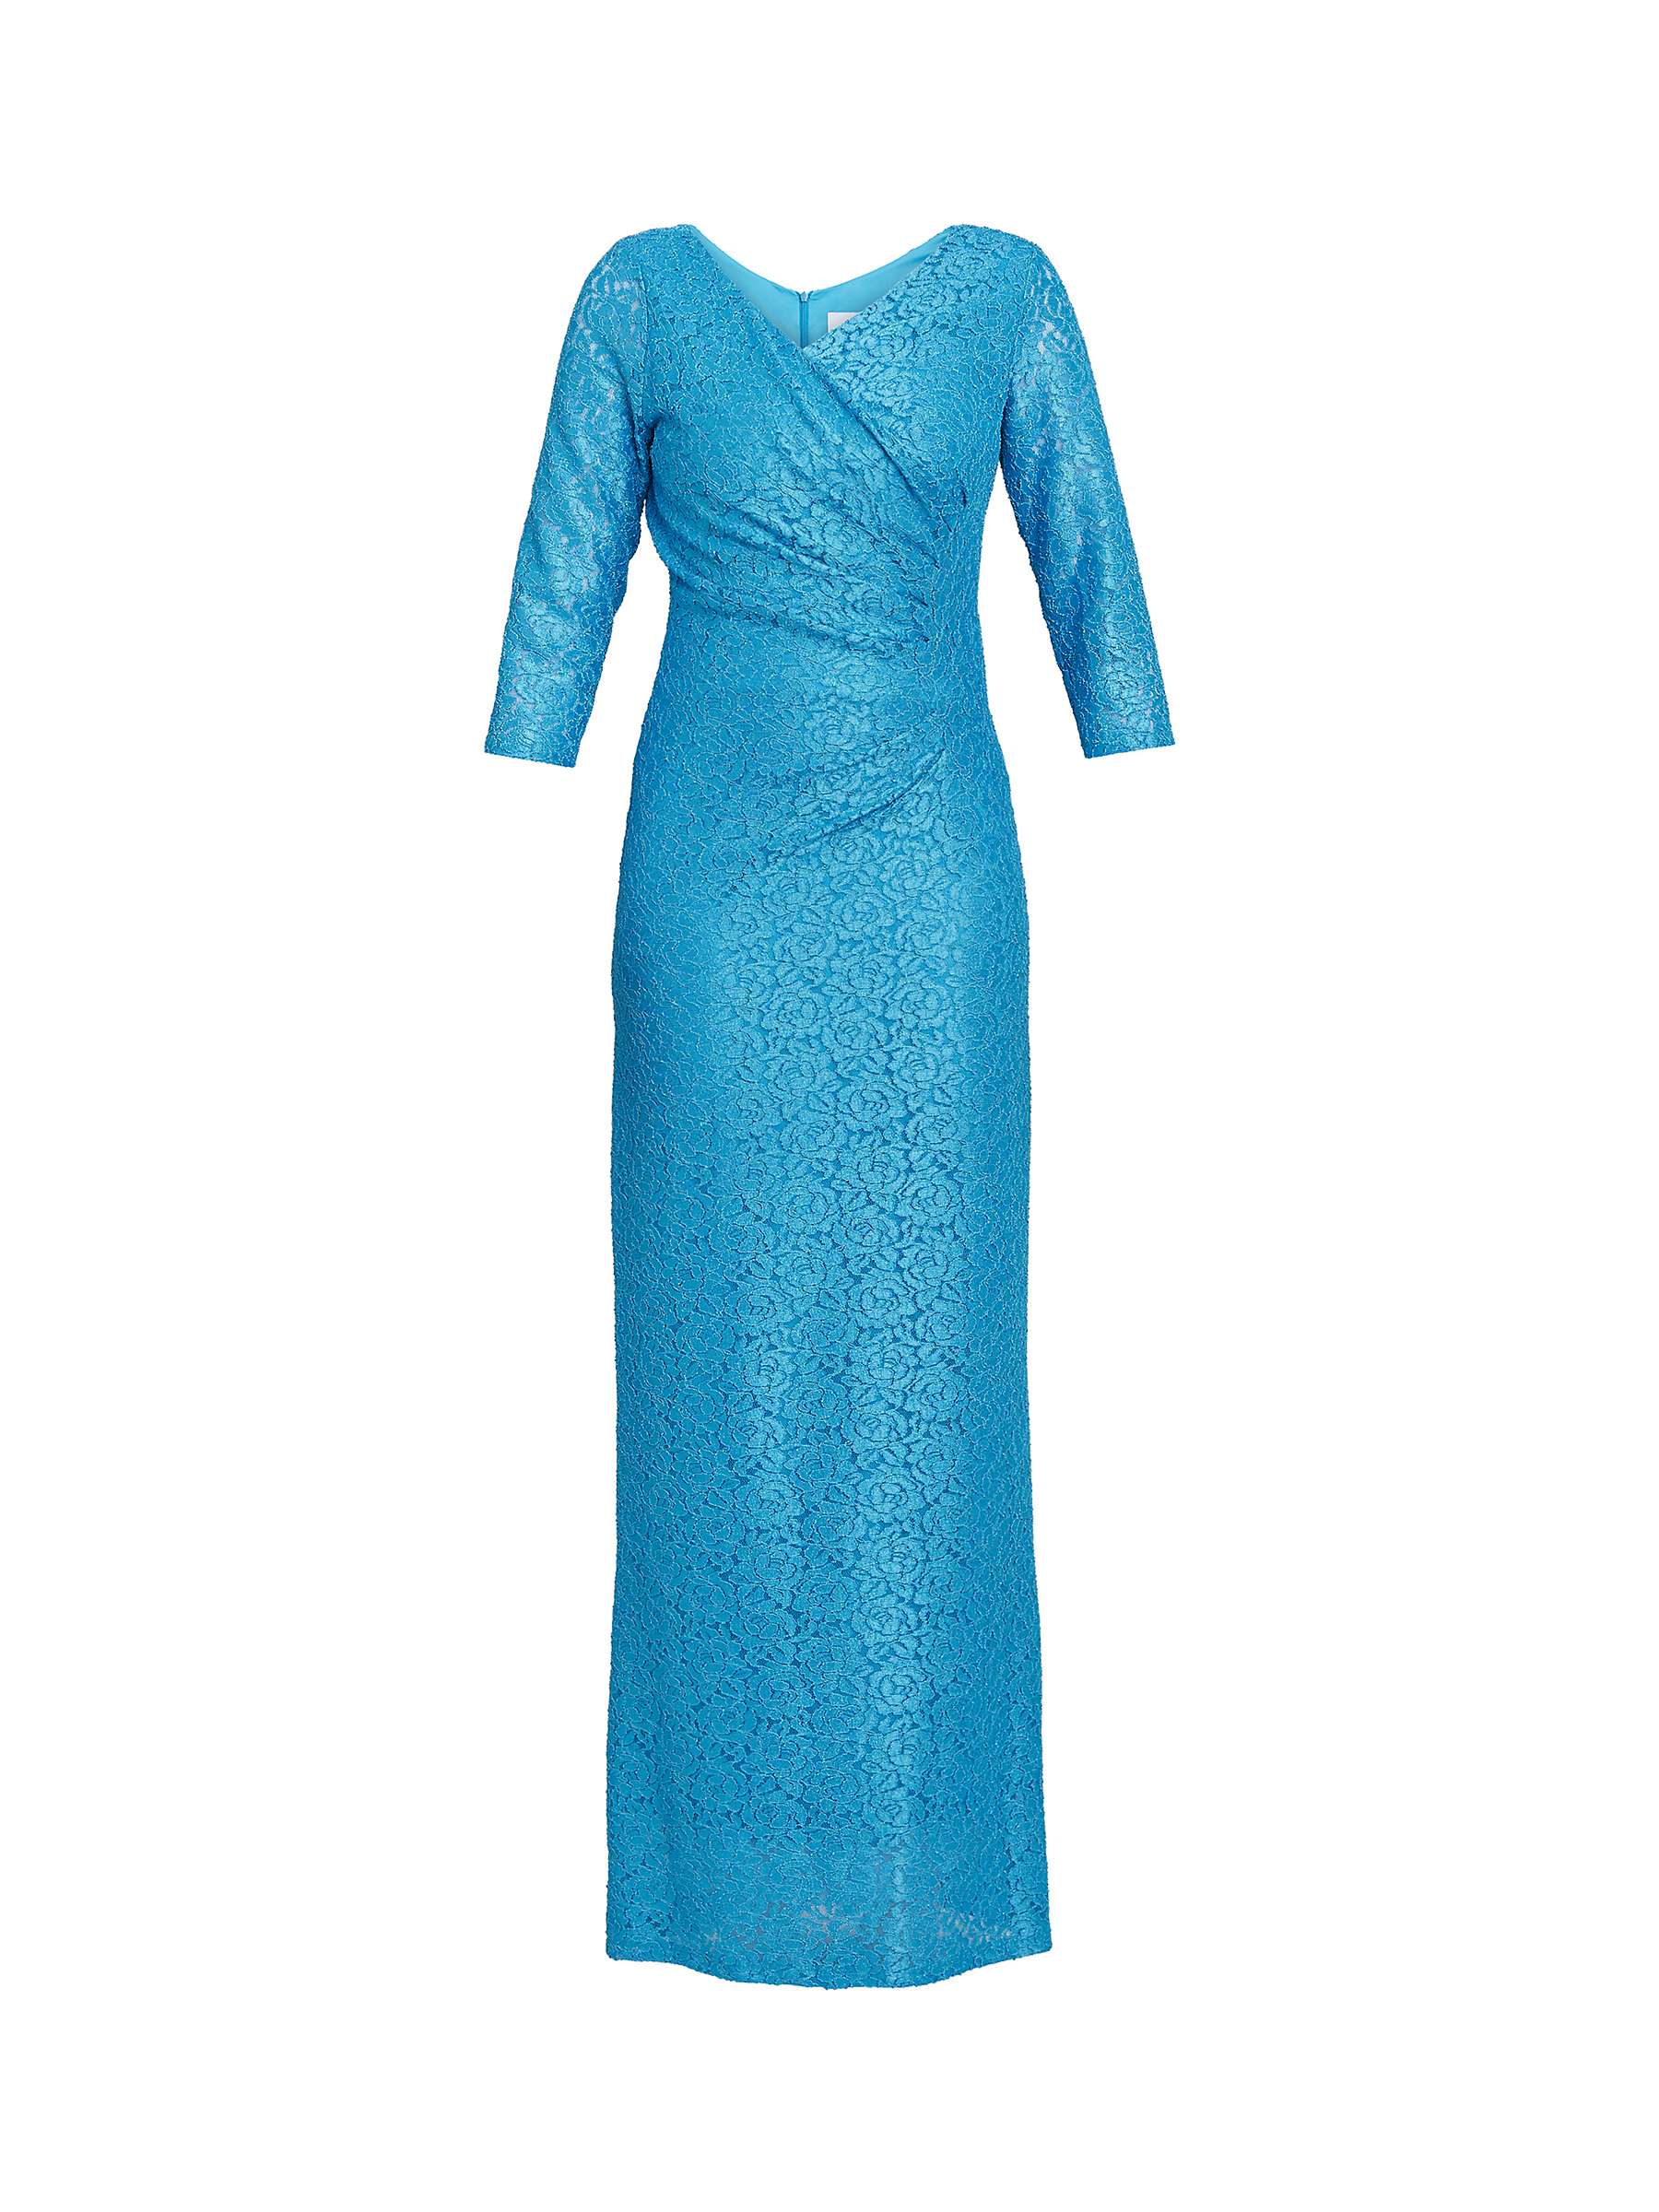 Buy Gina Bacconi Floral Lace Maxi Dress, Turquoise Online at johnlewis.com